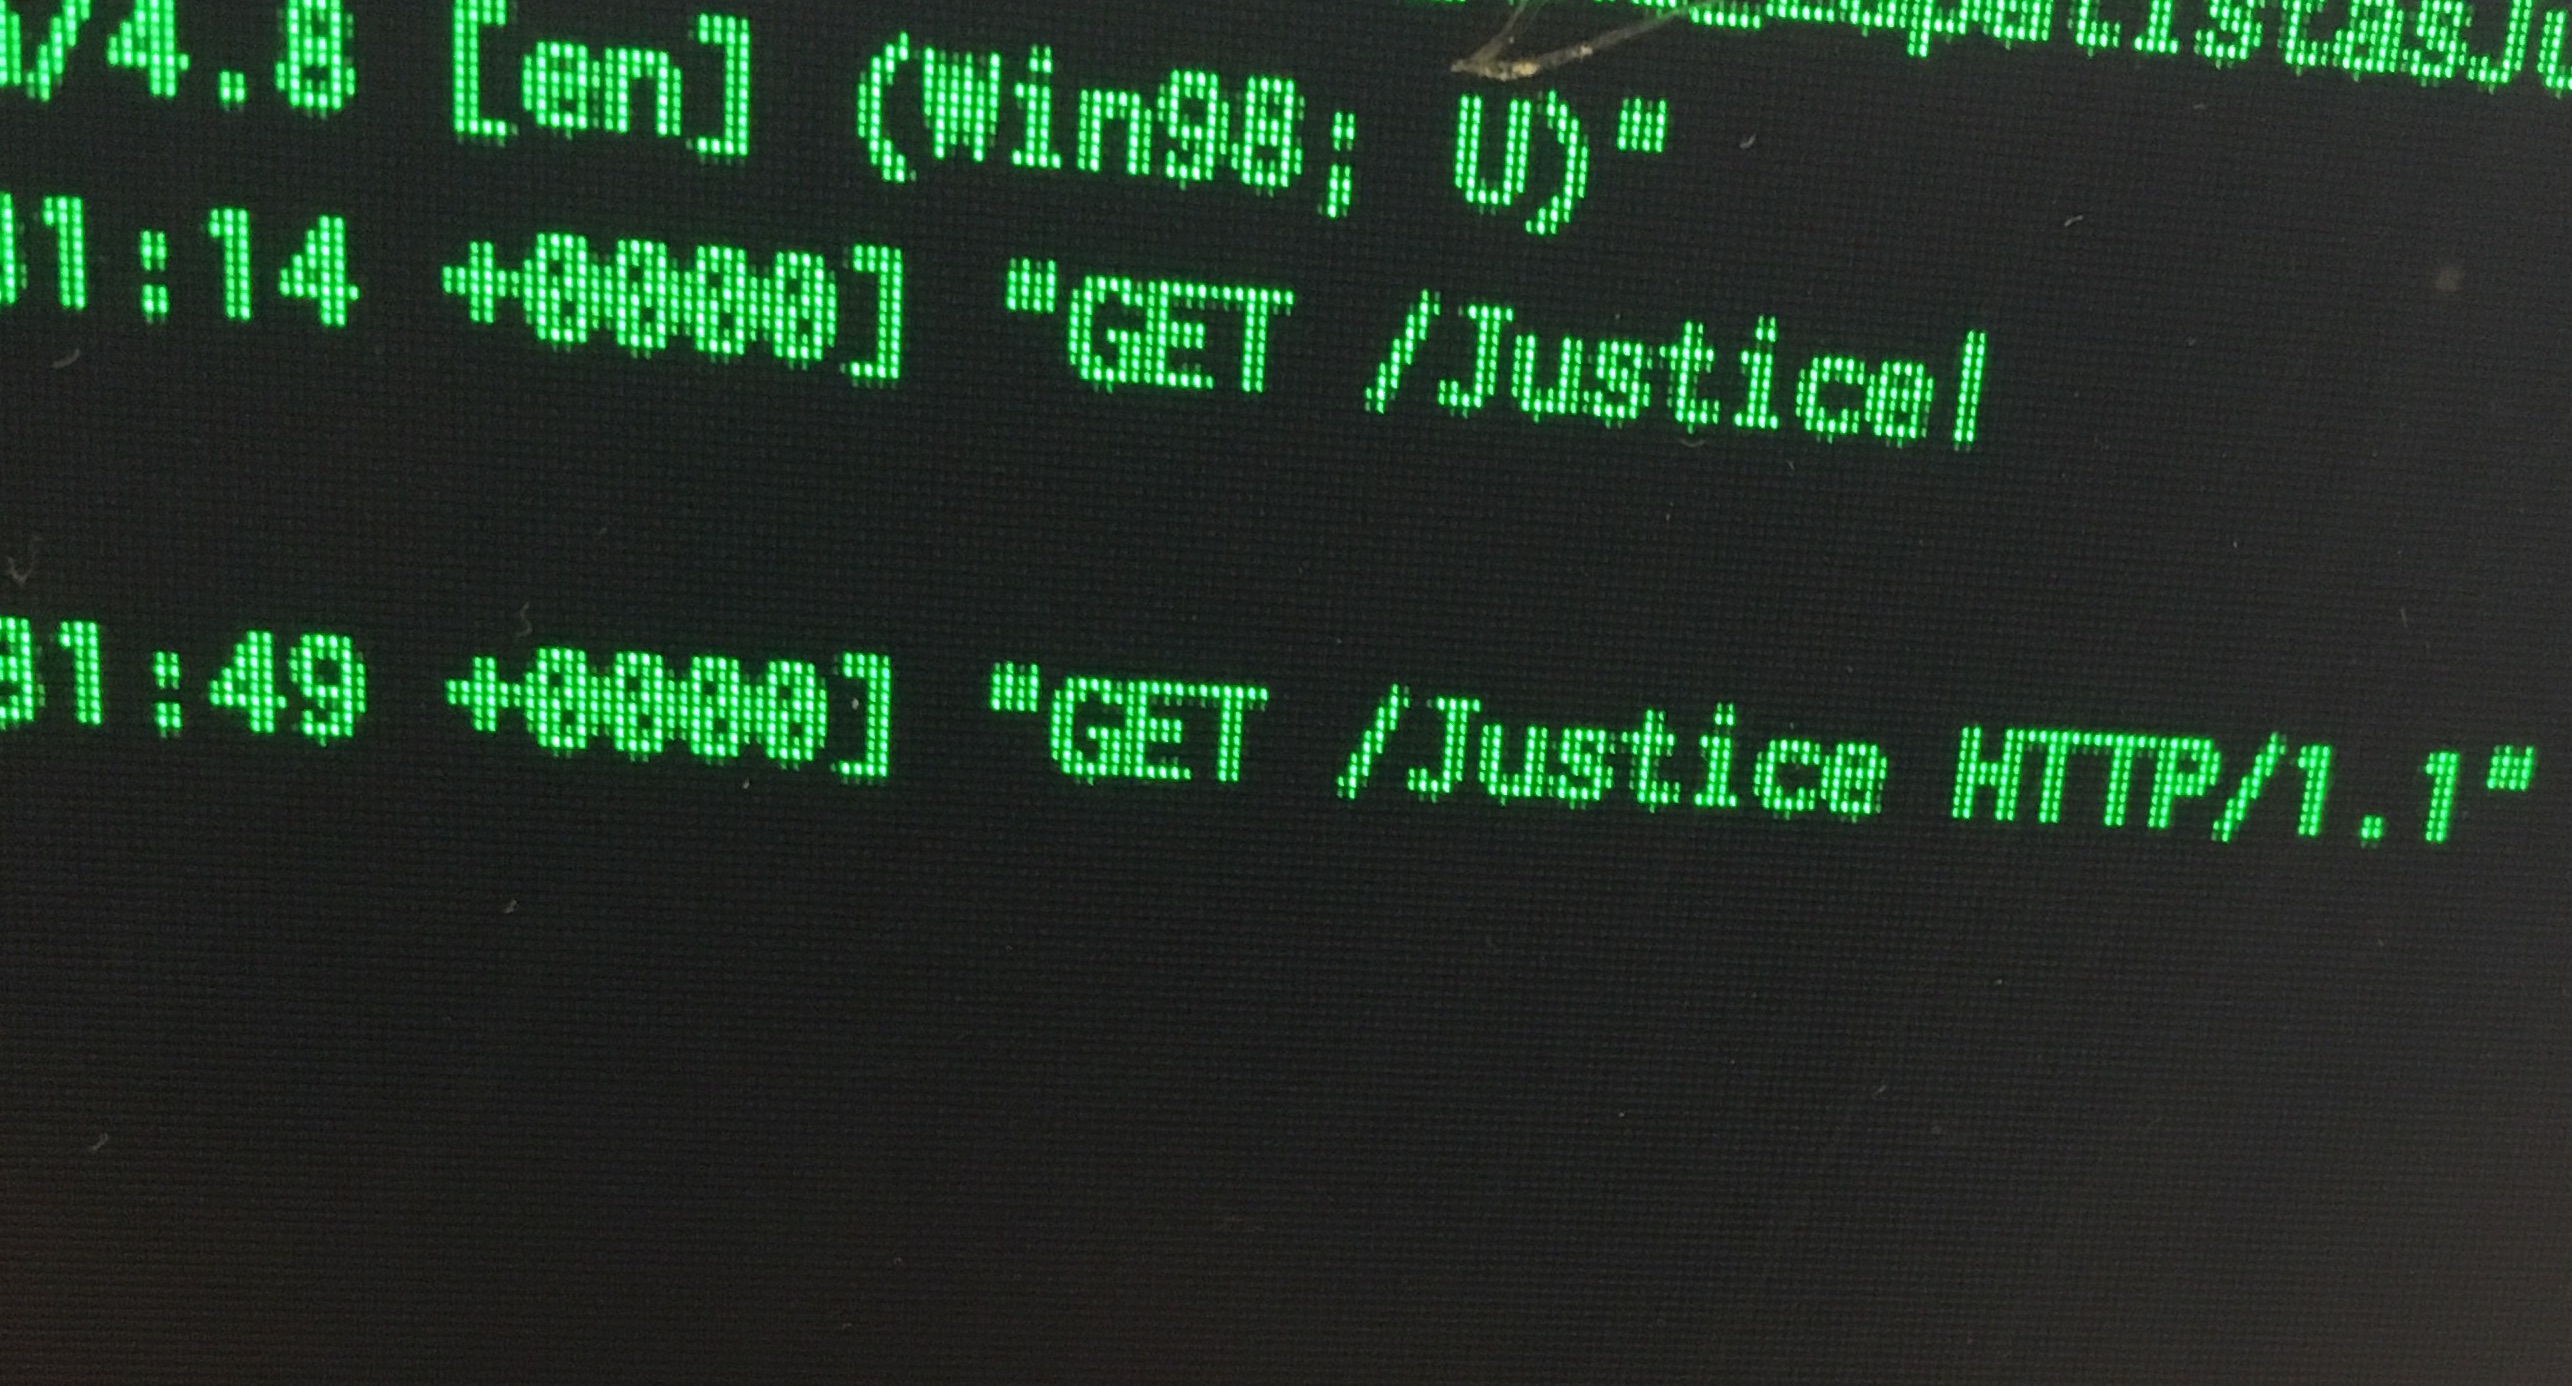 photograph of green text on computer screen reading: 'GET /Justice HTTP/1.1'.